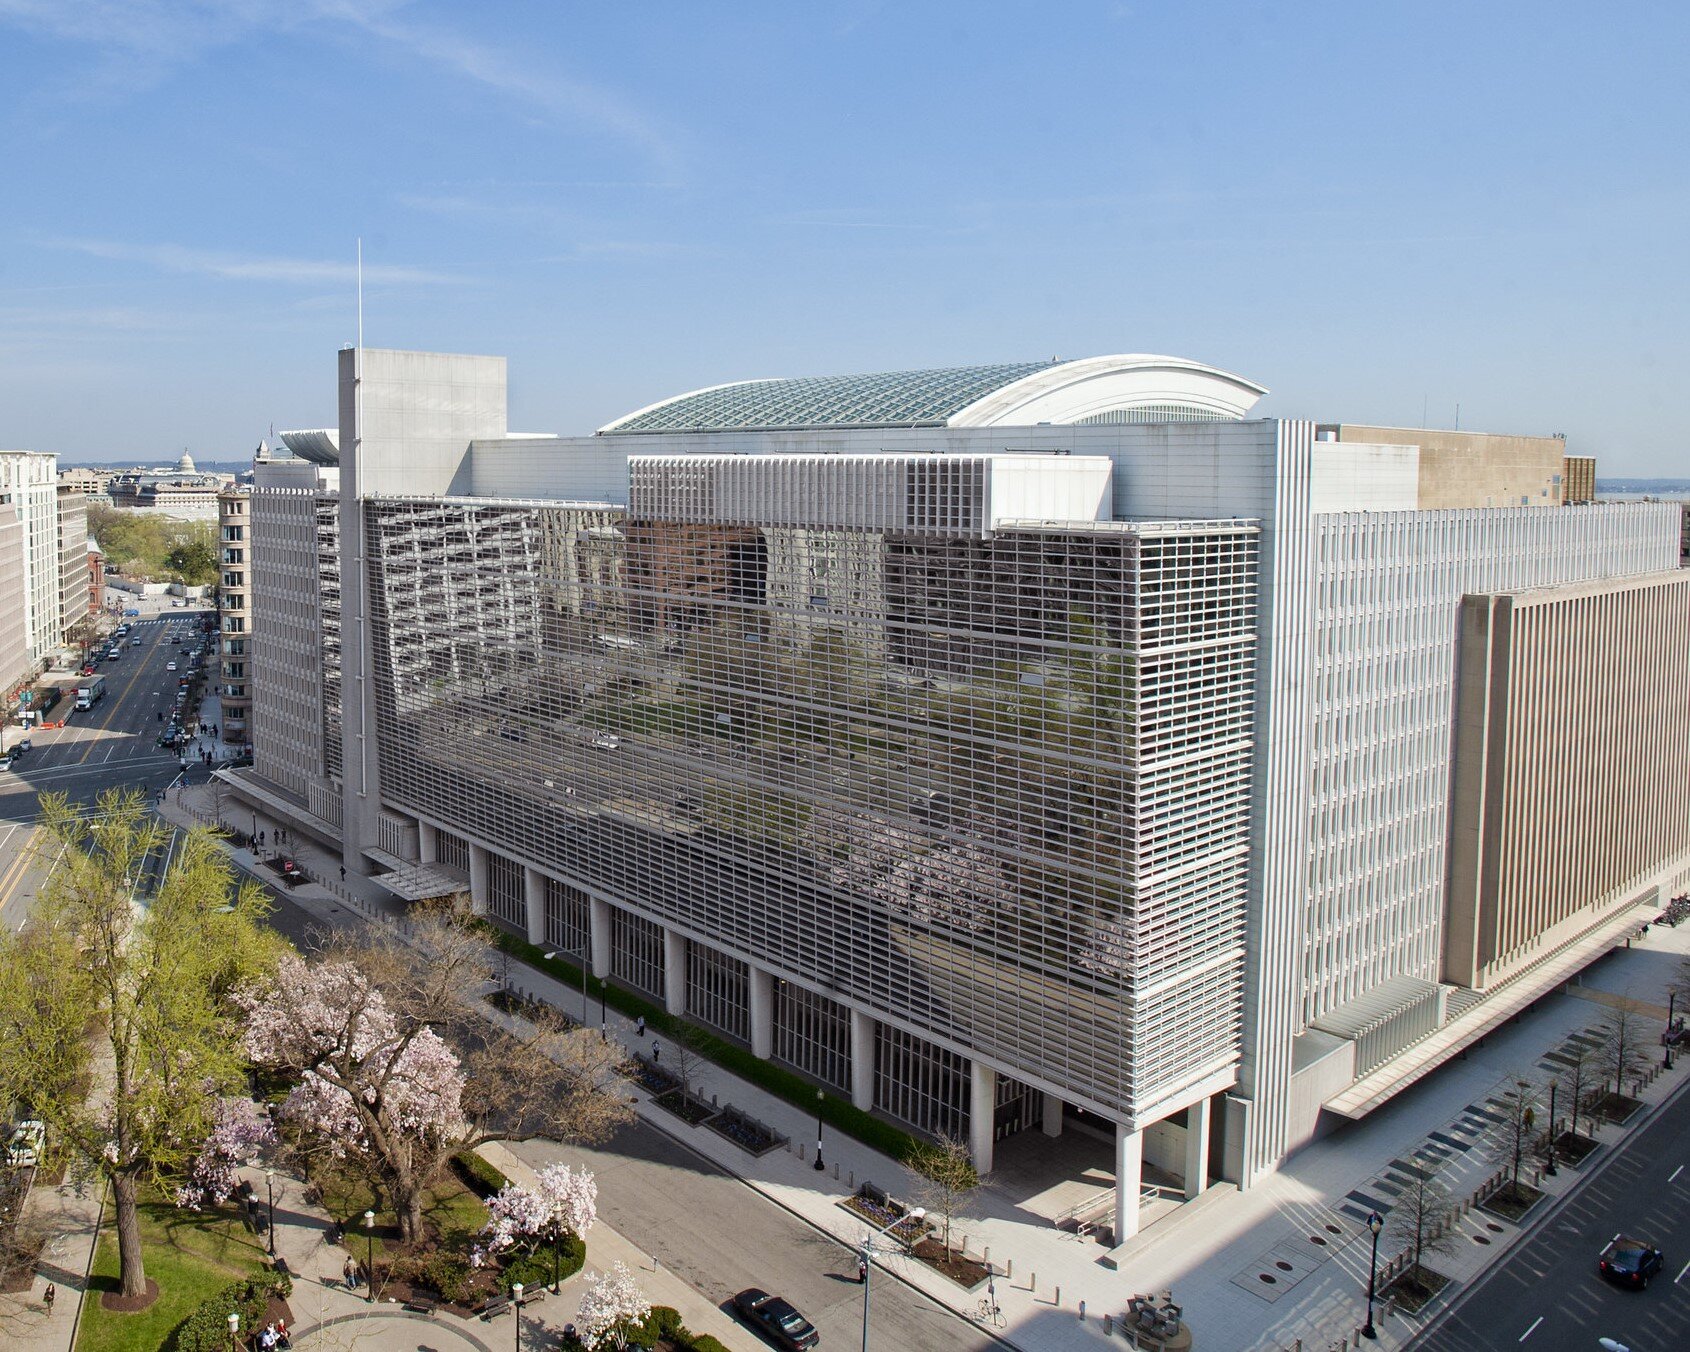 The Headquarters of the World Bank in Washington DC